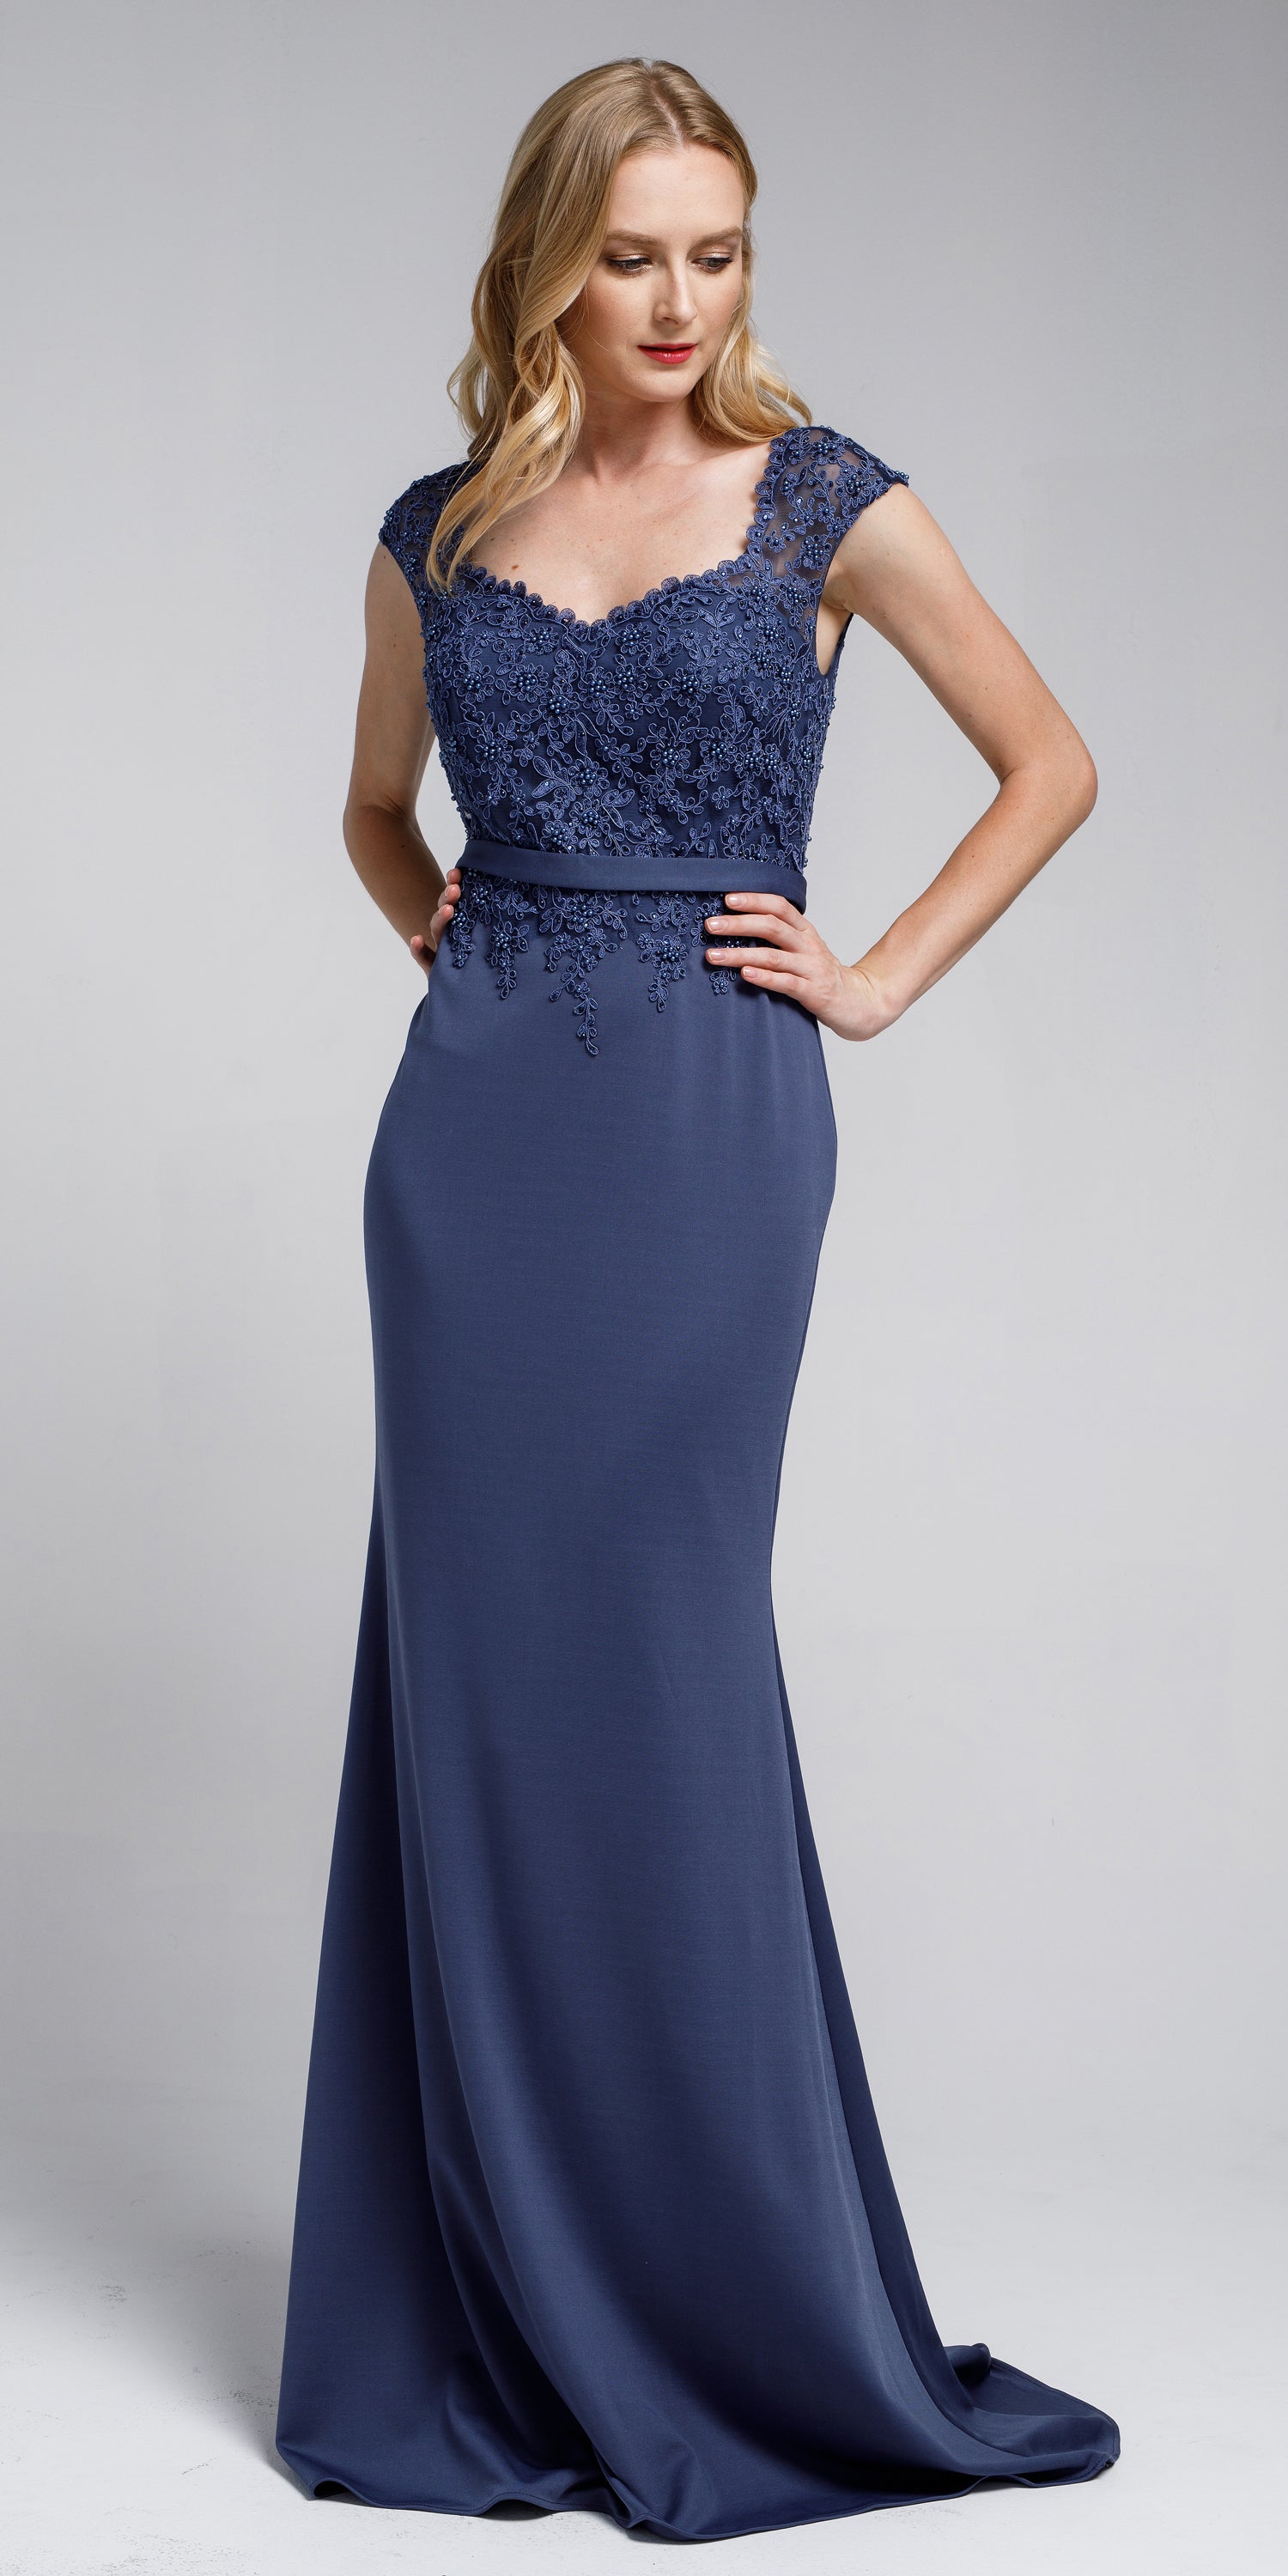 Main image of Sweatheart Neckline Embroidered Evening Gown